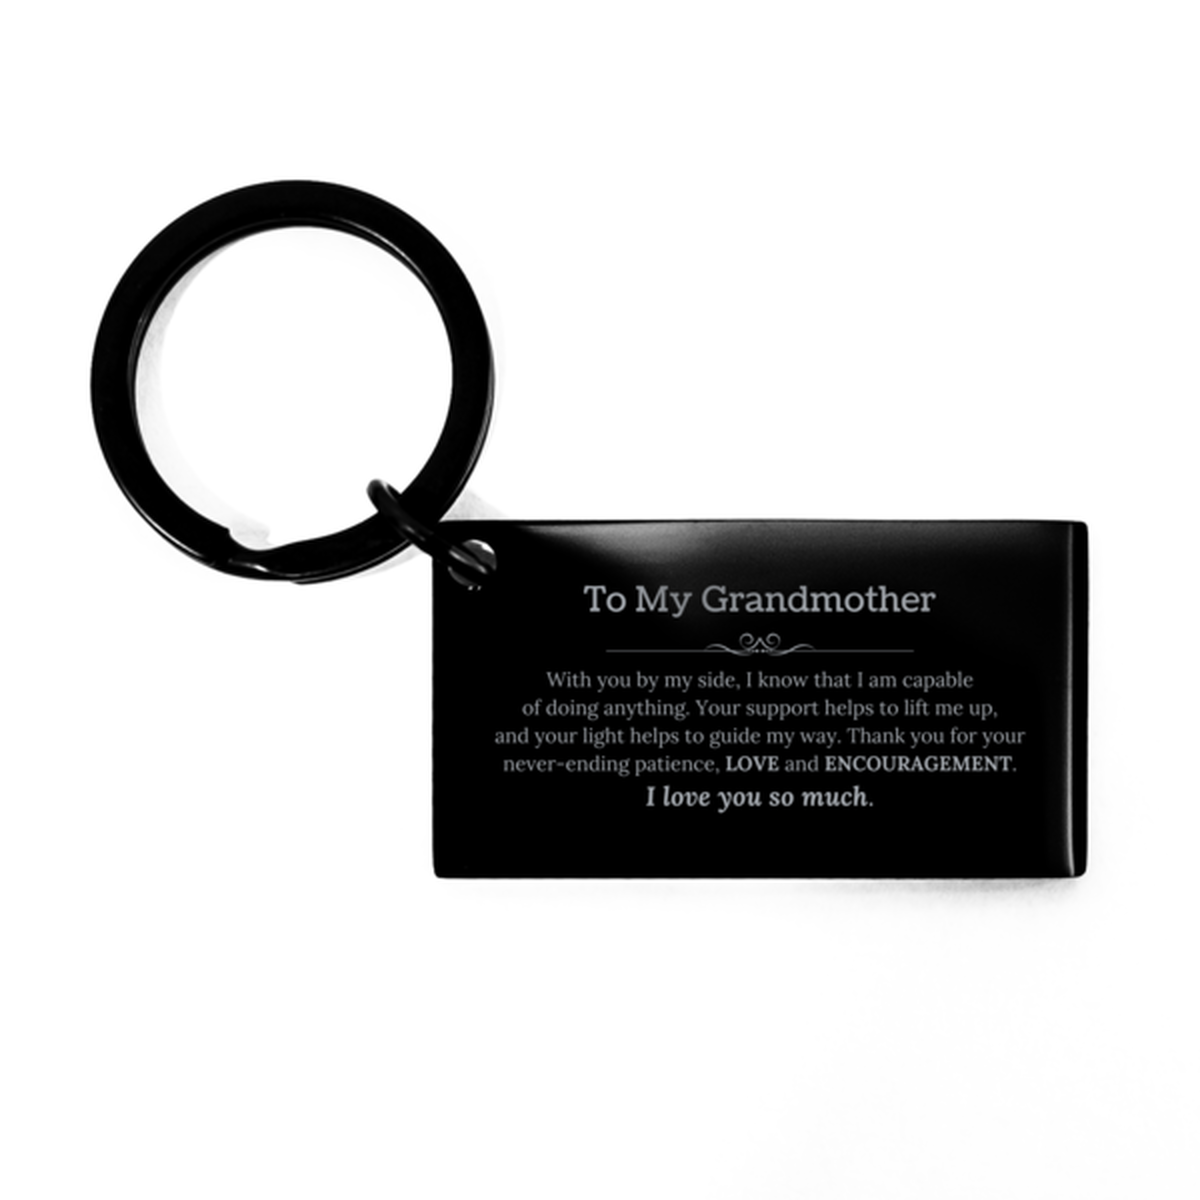 Appreciation Grandmother Keychain Gifts, To My Grandmother Birthday Christmas Wedding Keepsake Gifts for Grandmother With you by my side, I know that I am capable of doing anything. I love you so much